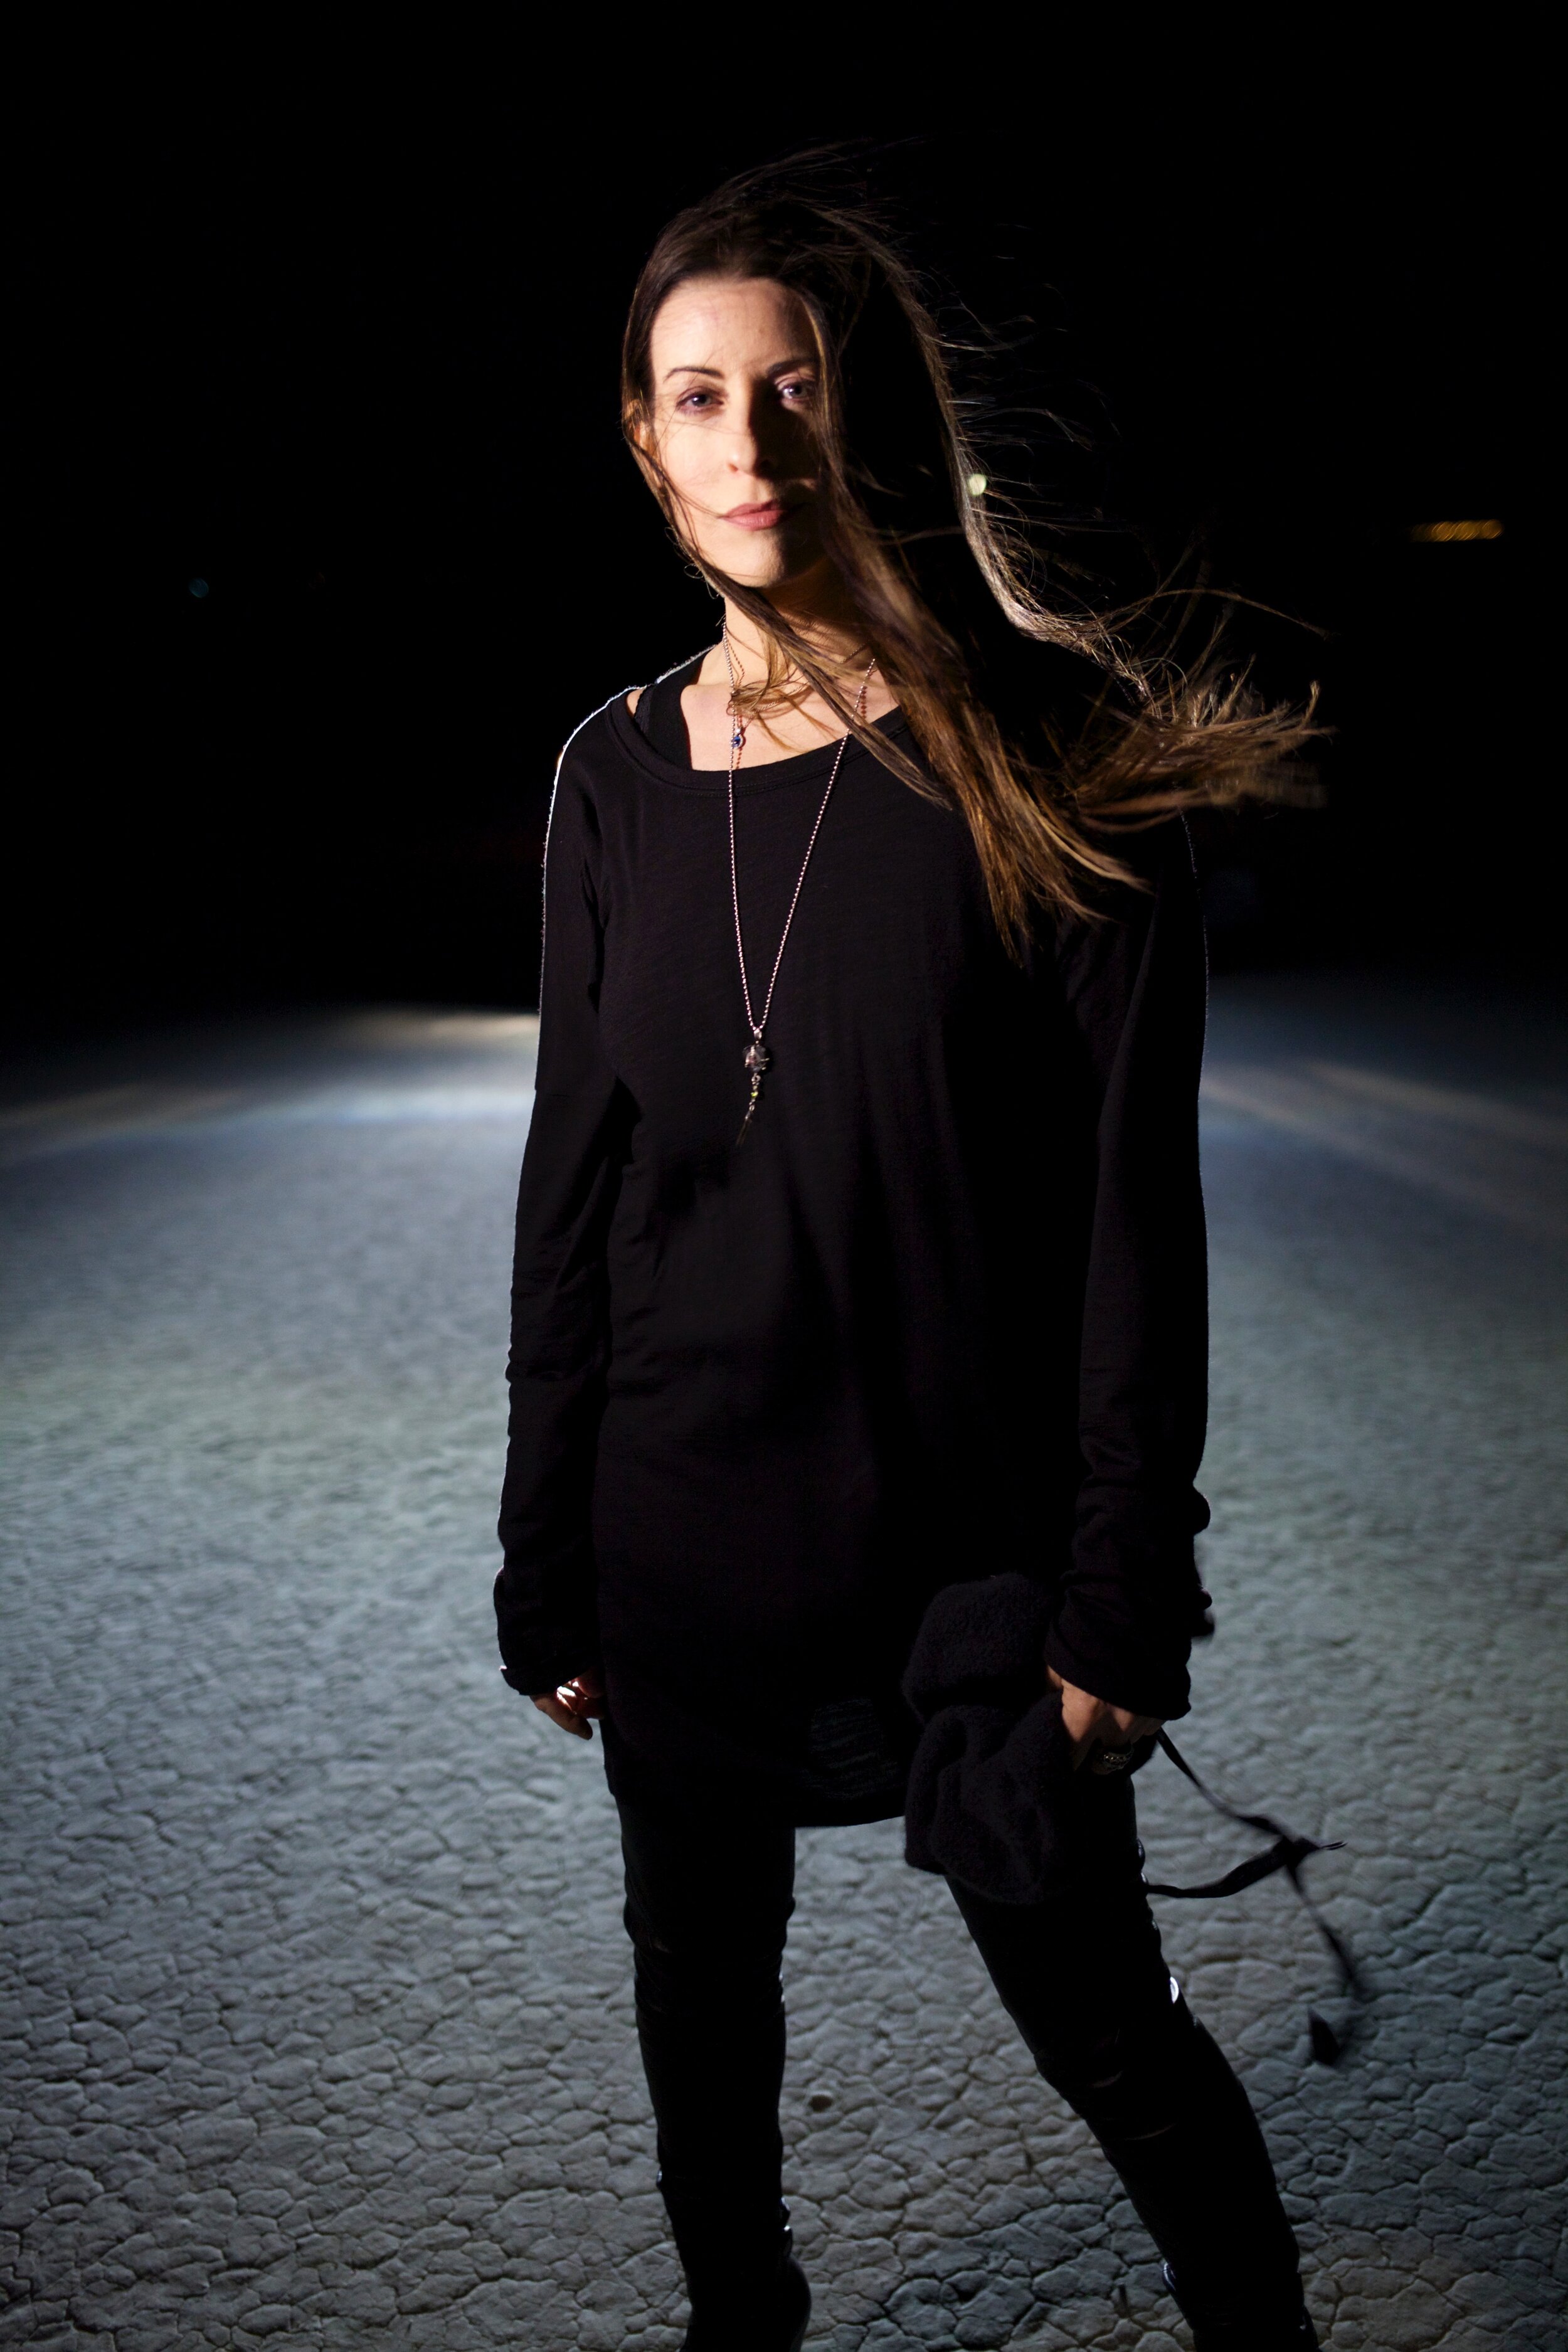 Connie Hunt "Desert Night 2" by Jim Shea Photography